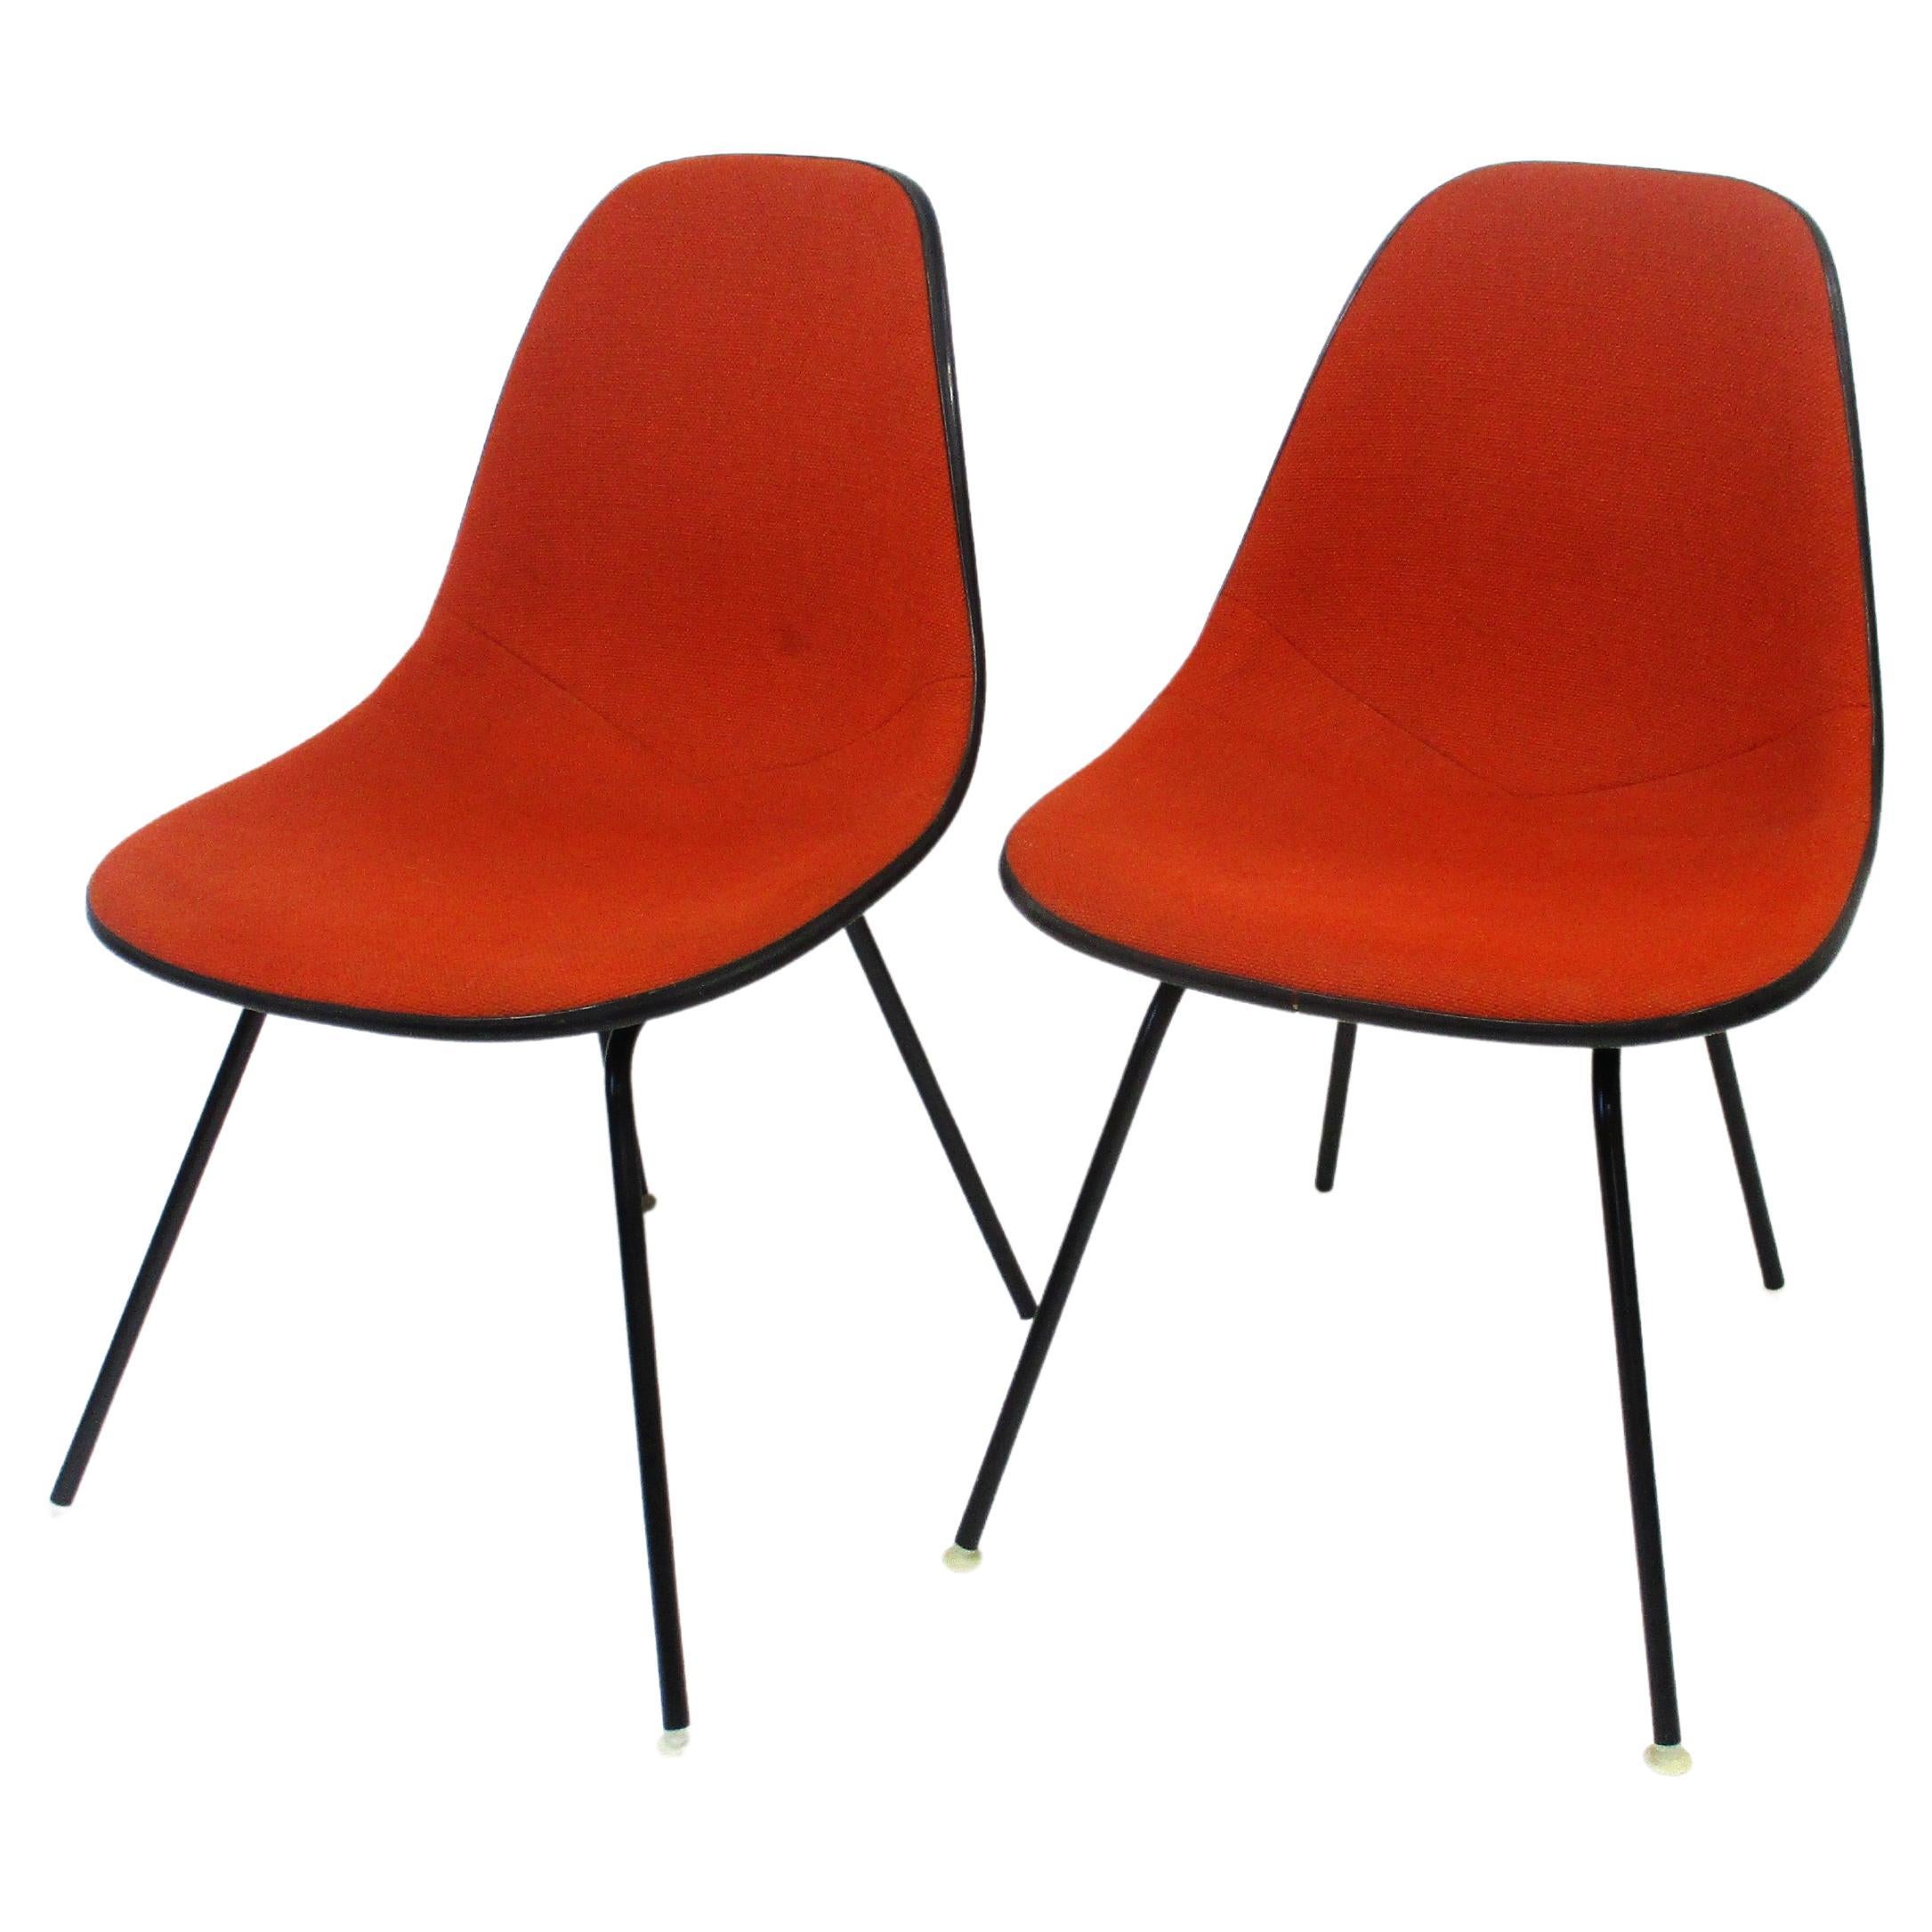 Eames Upholstered H Based Side Chairs for Herman Miller Pair